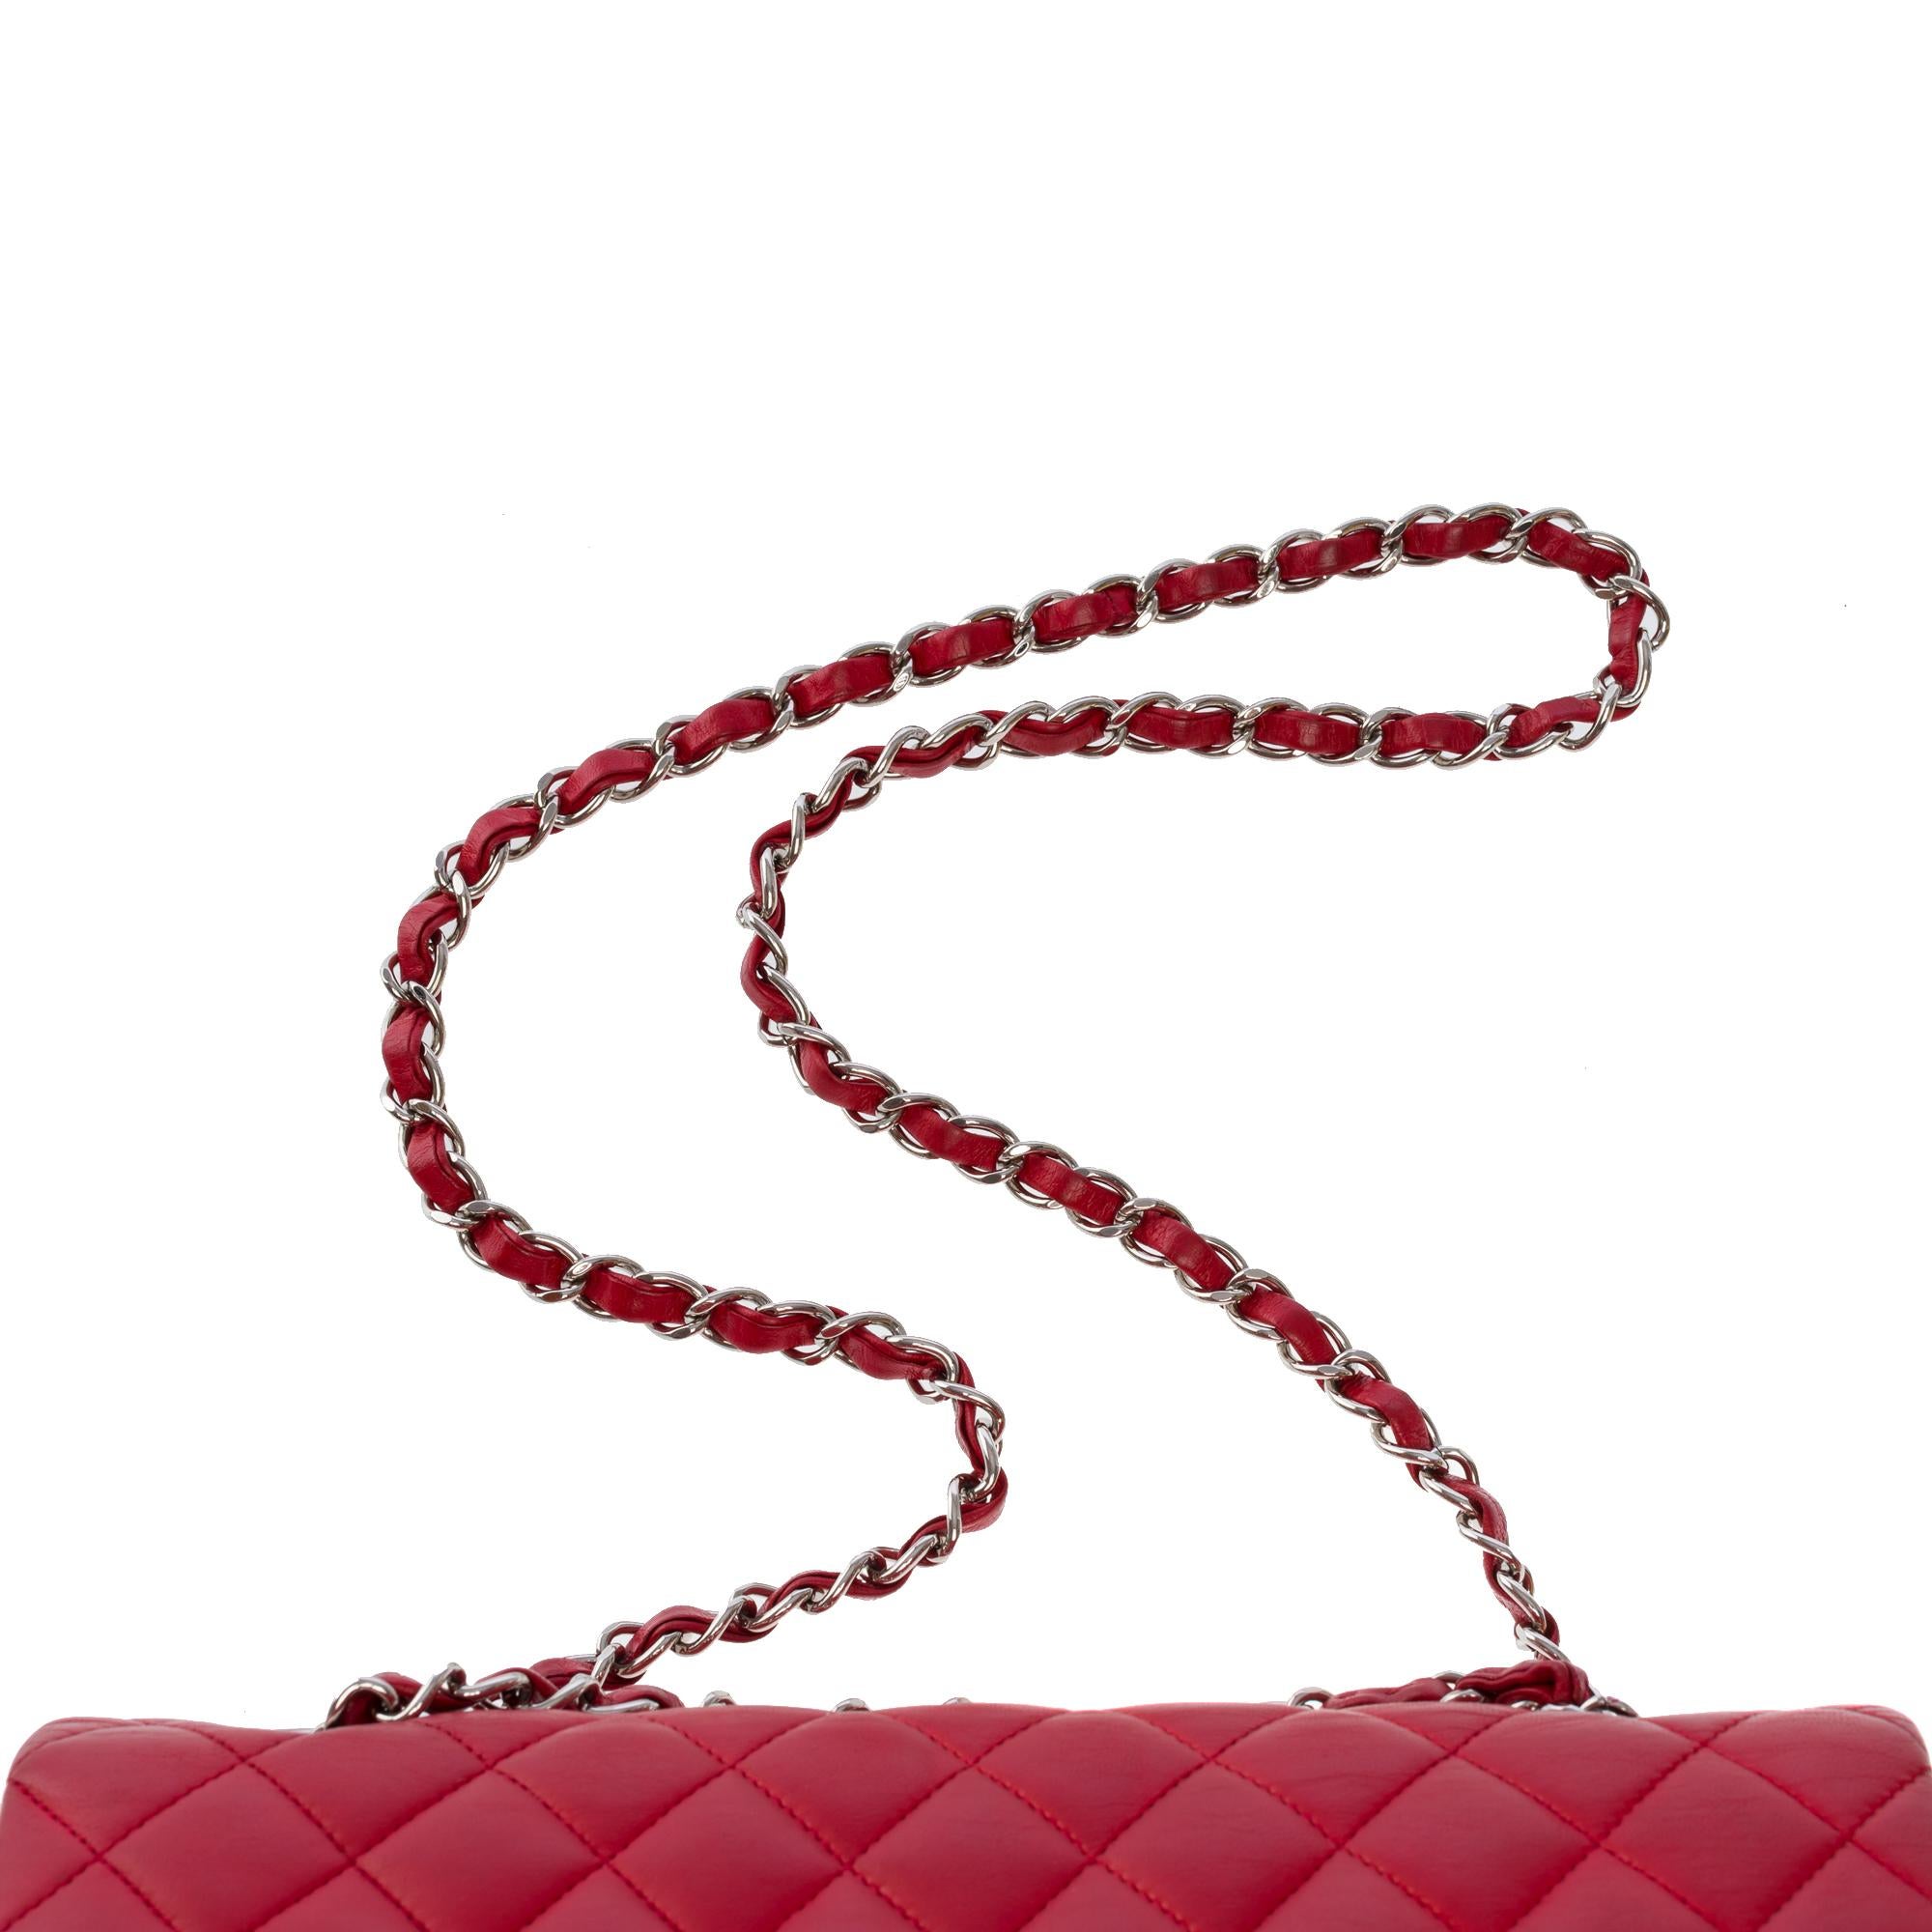 Chanel Timeless Medium double flap shoulder bag in Red lambskin leather, SHW For Sale 5